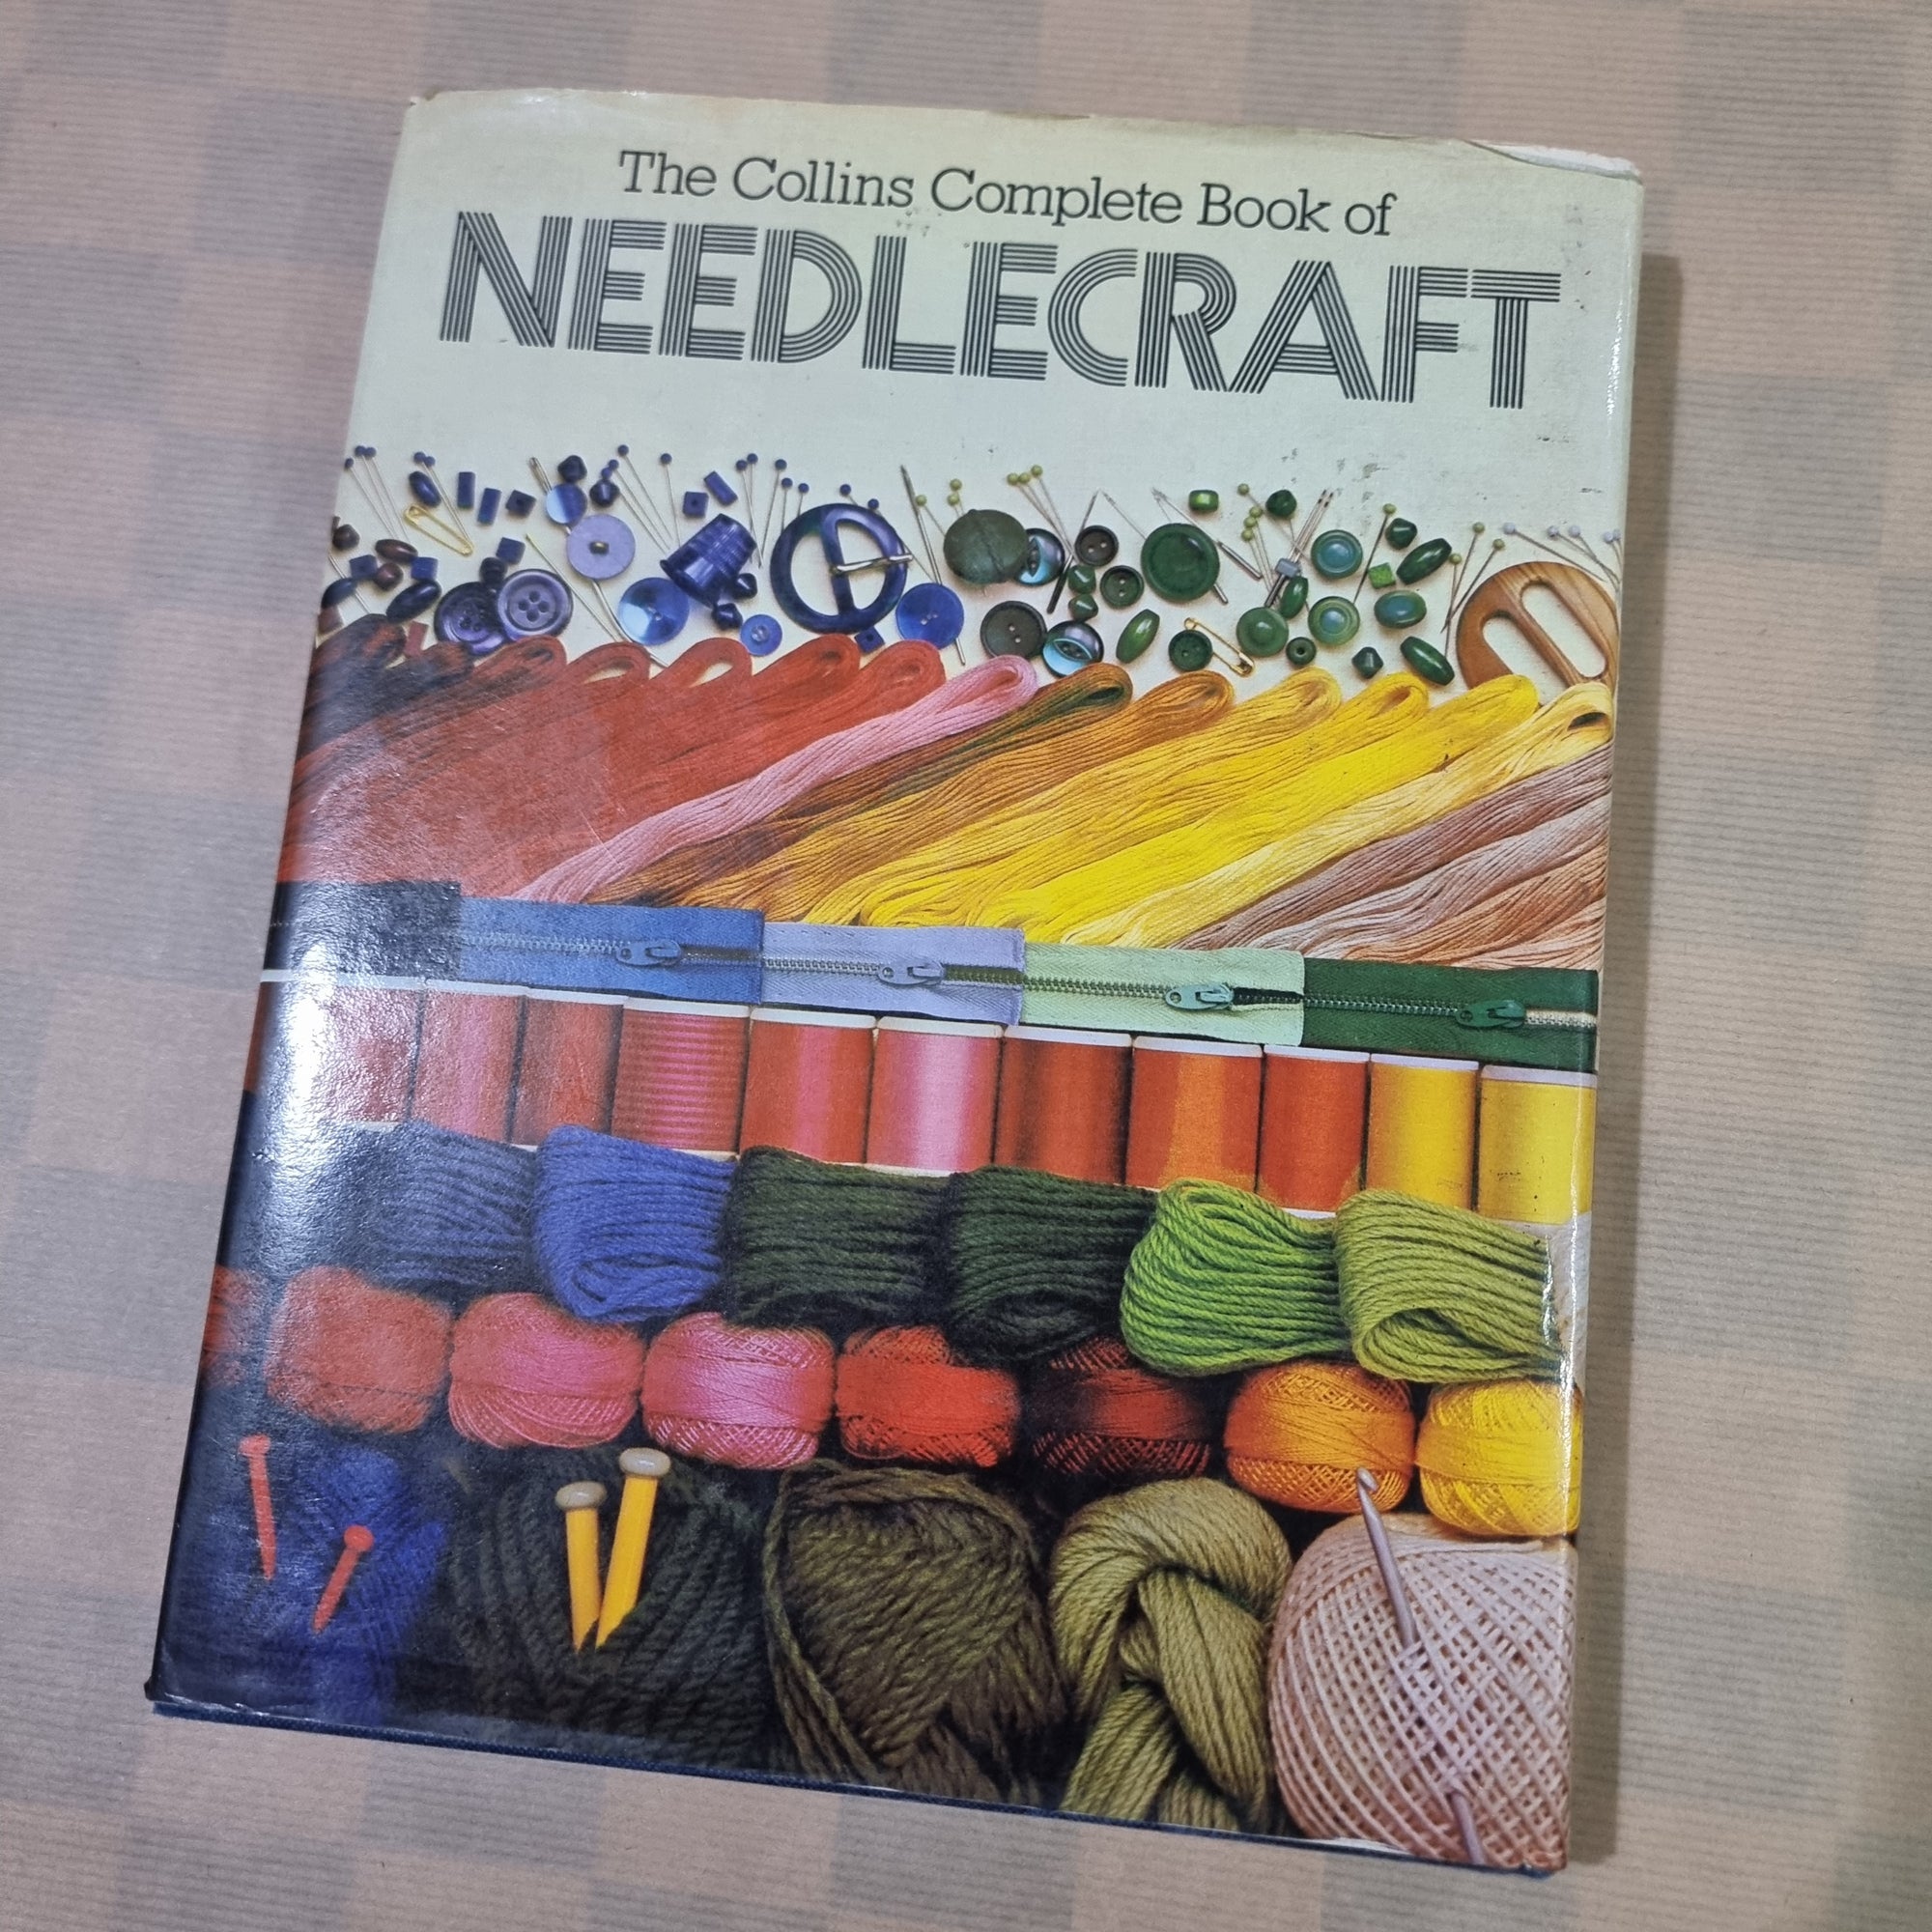 The Collins Complete Book of Needlecraft